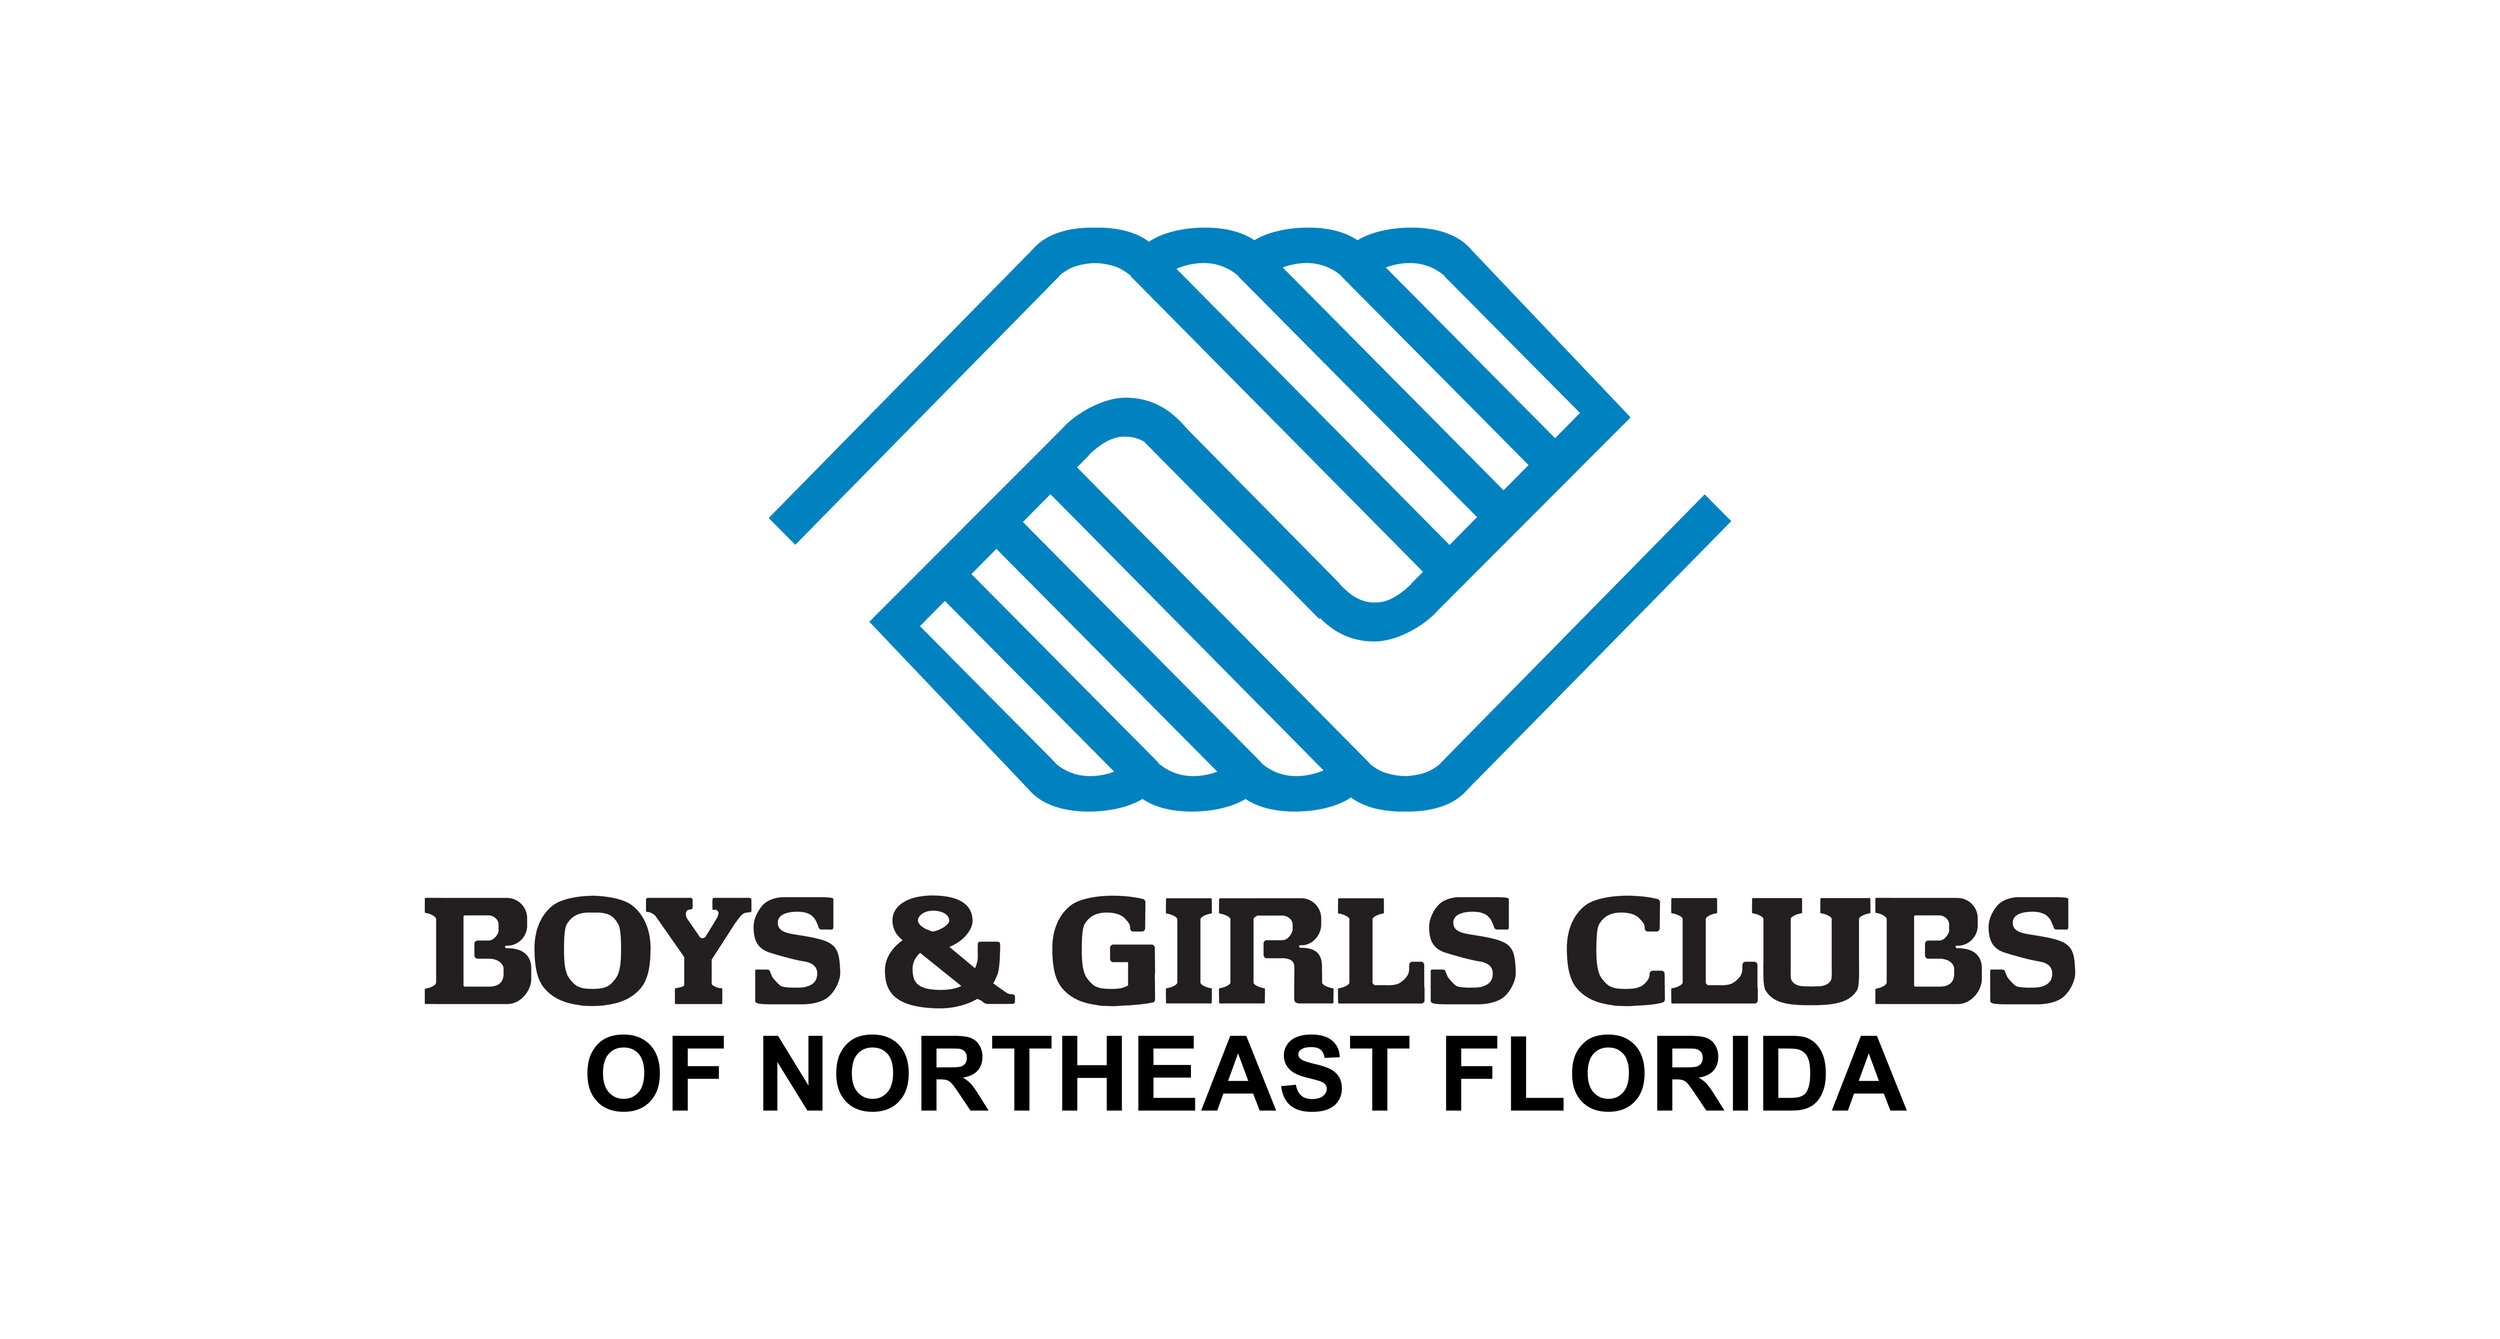 GATE Marks 60th Anniversary with $60,000 Donation to Boys & Girls Club of Northeast Florida